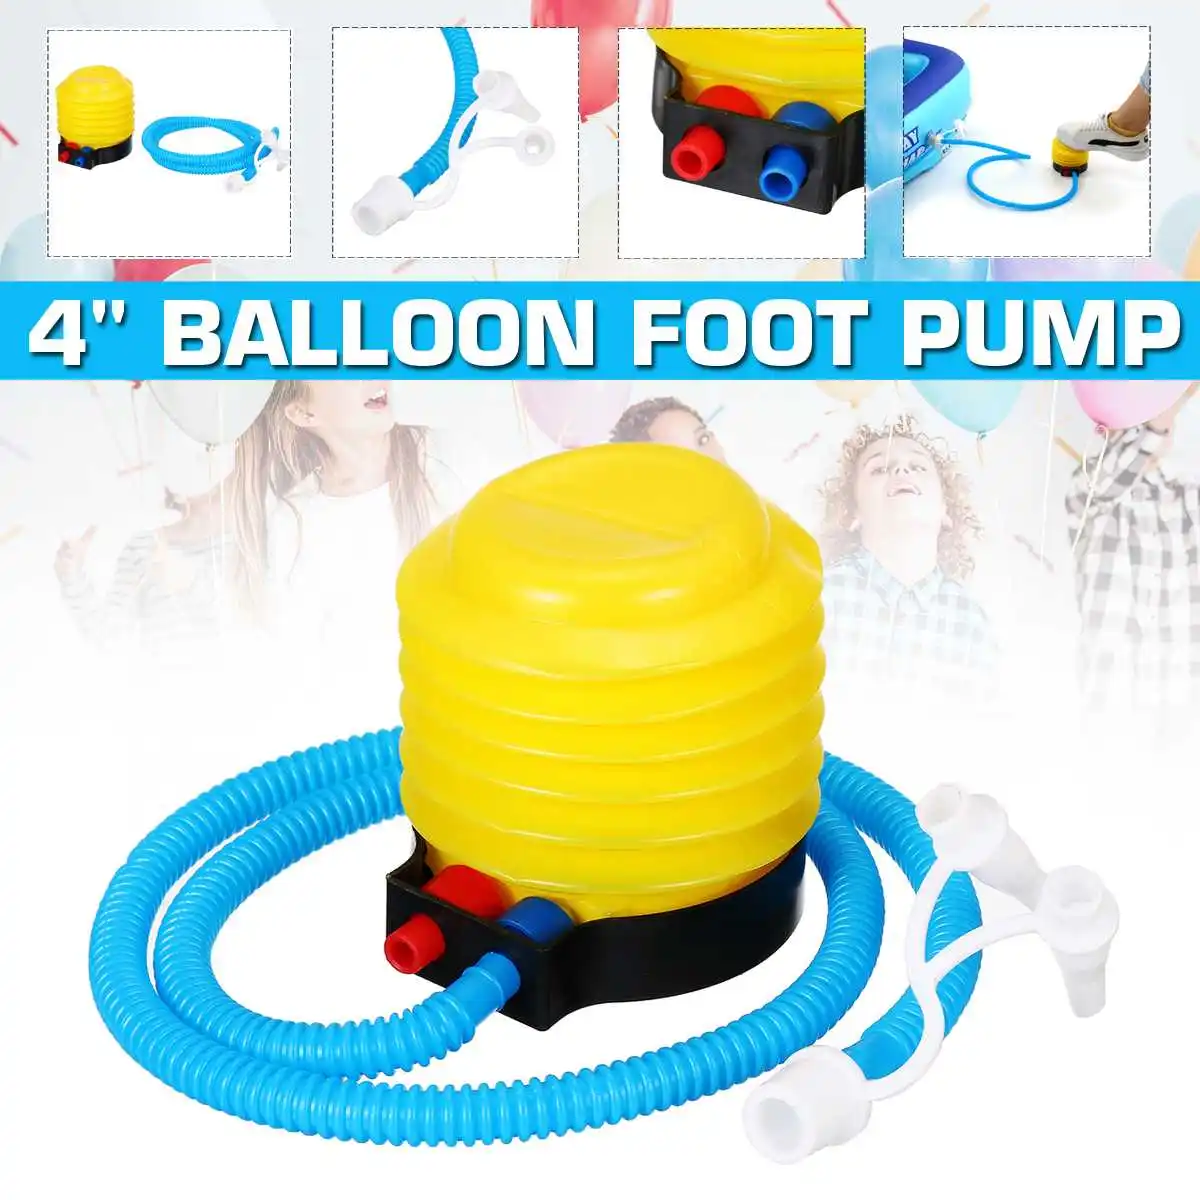 pools Foot/manual pump for inflatable air beds exercise balls etc. toys 